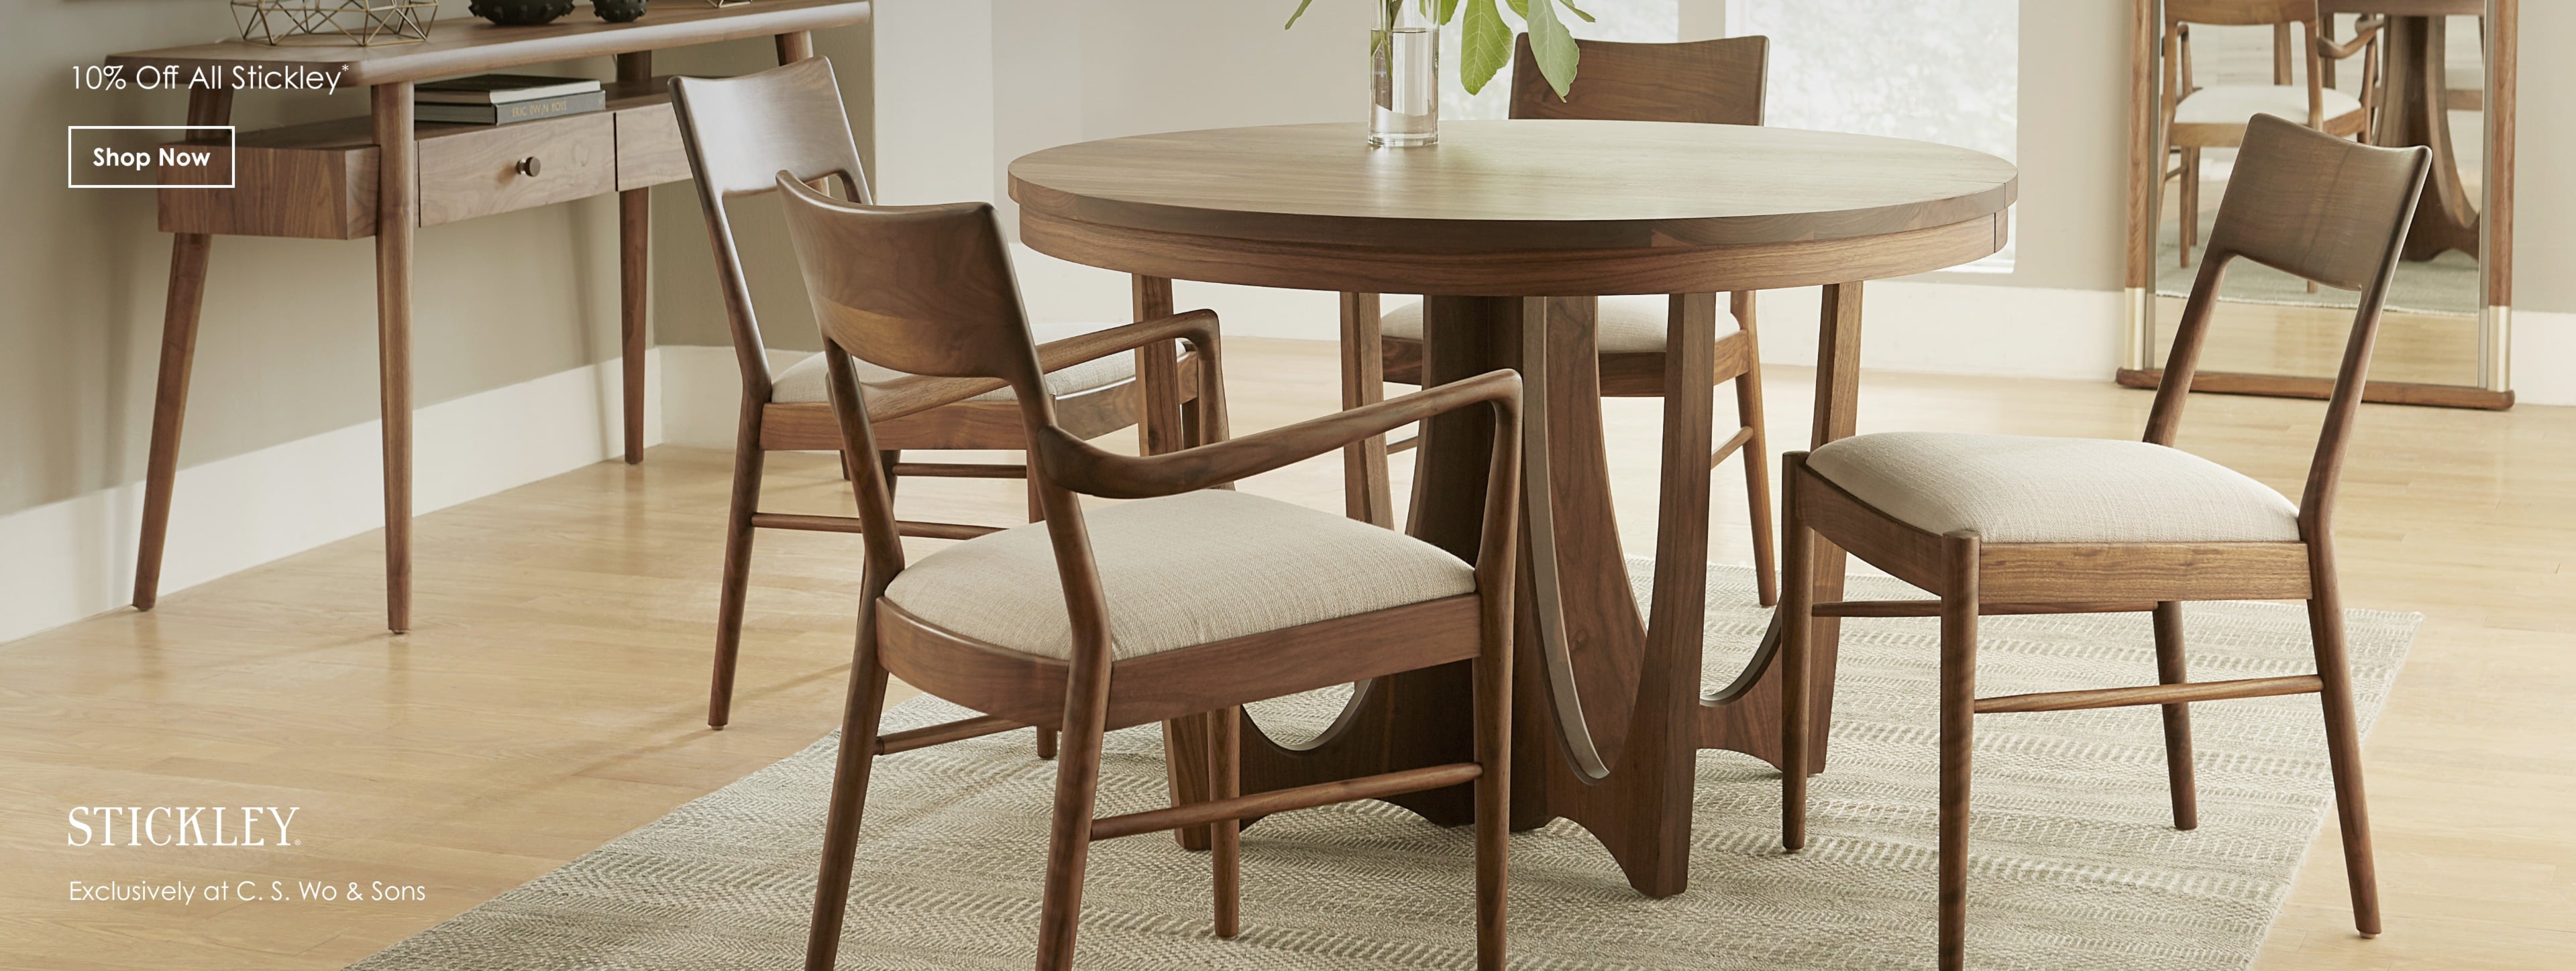 10% off all Stickley. Ask for details.